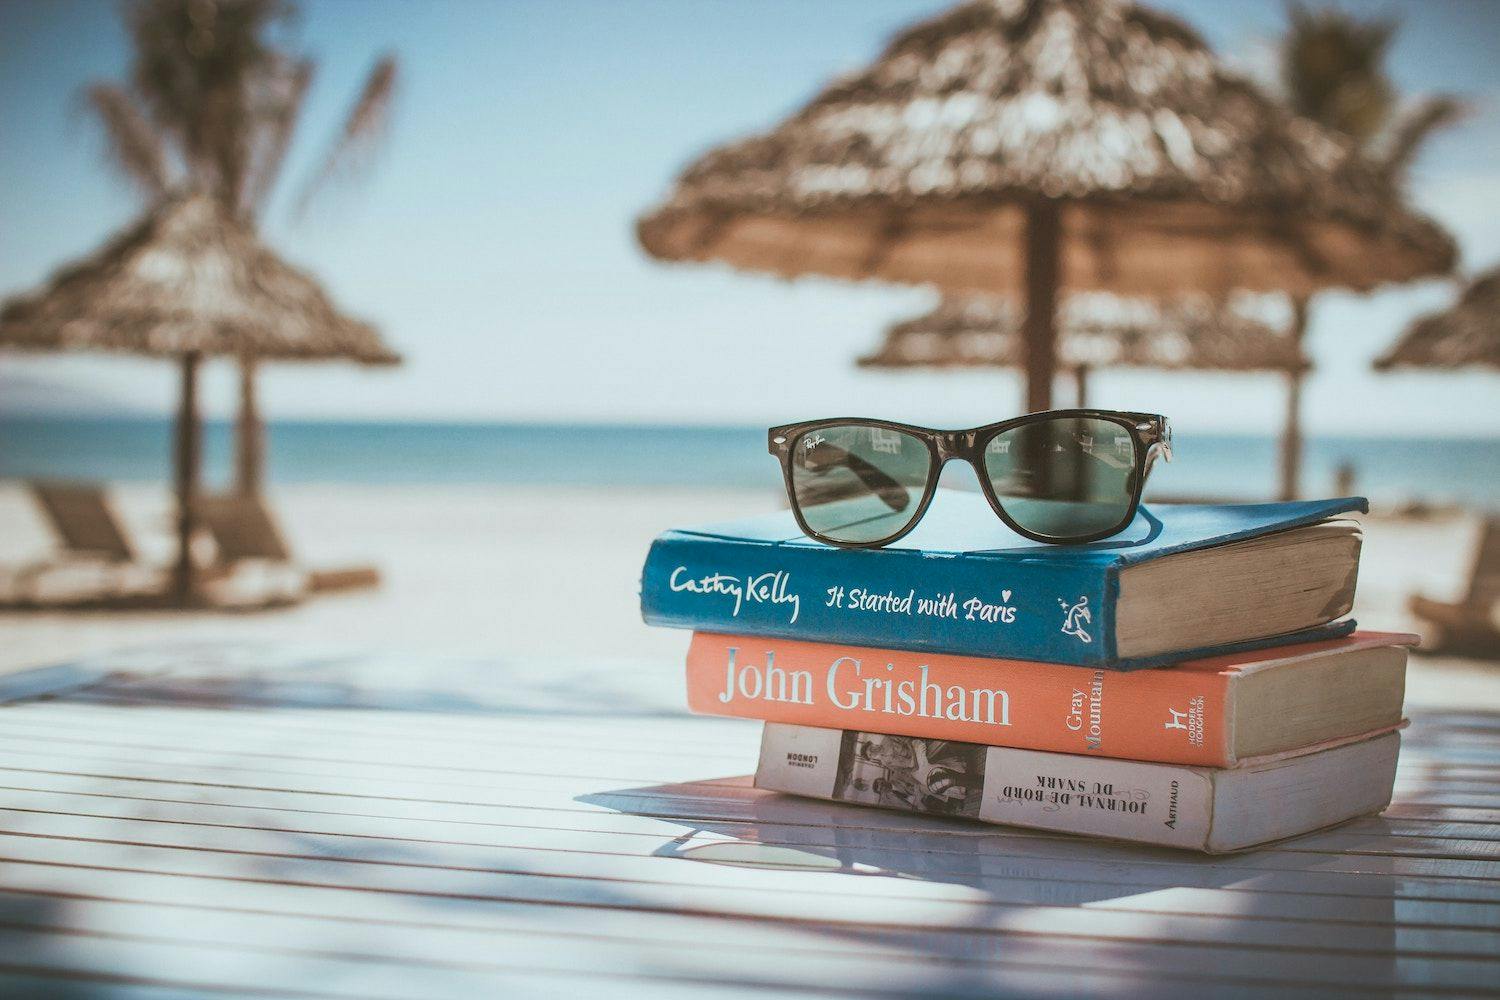 Image shows three books stacked on a table on a beach with a pair of sunglasses on top of them.